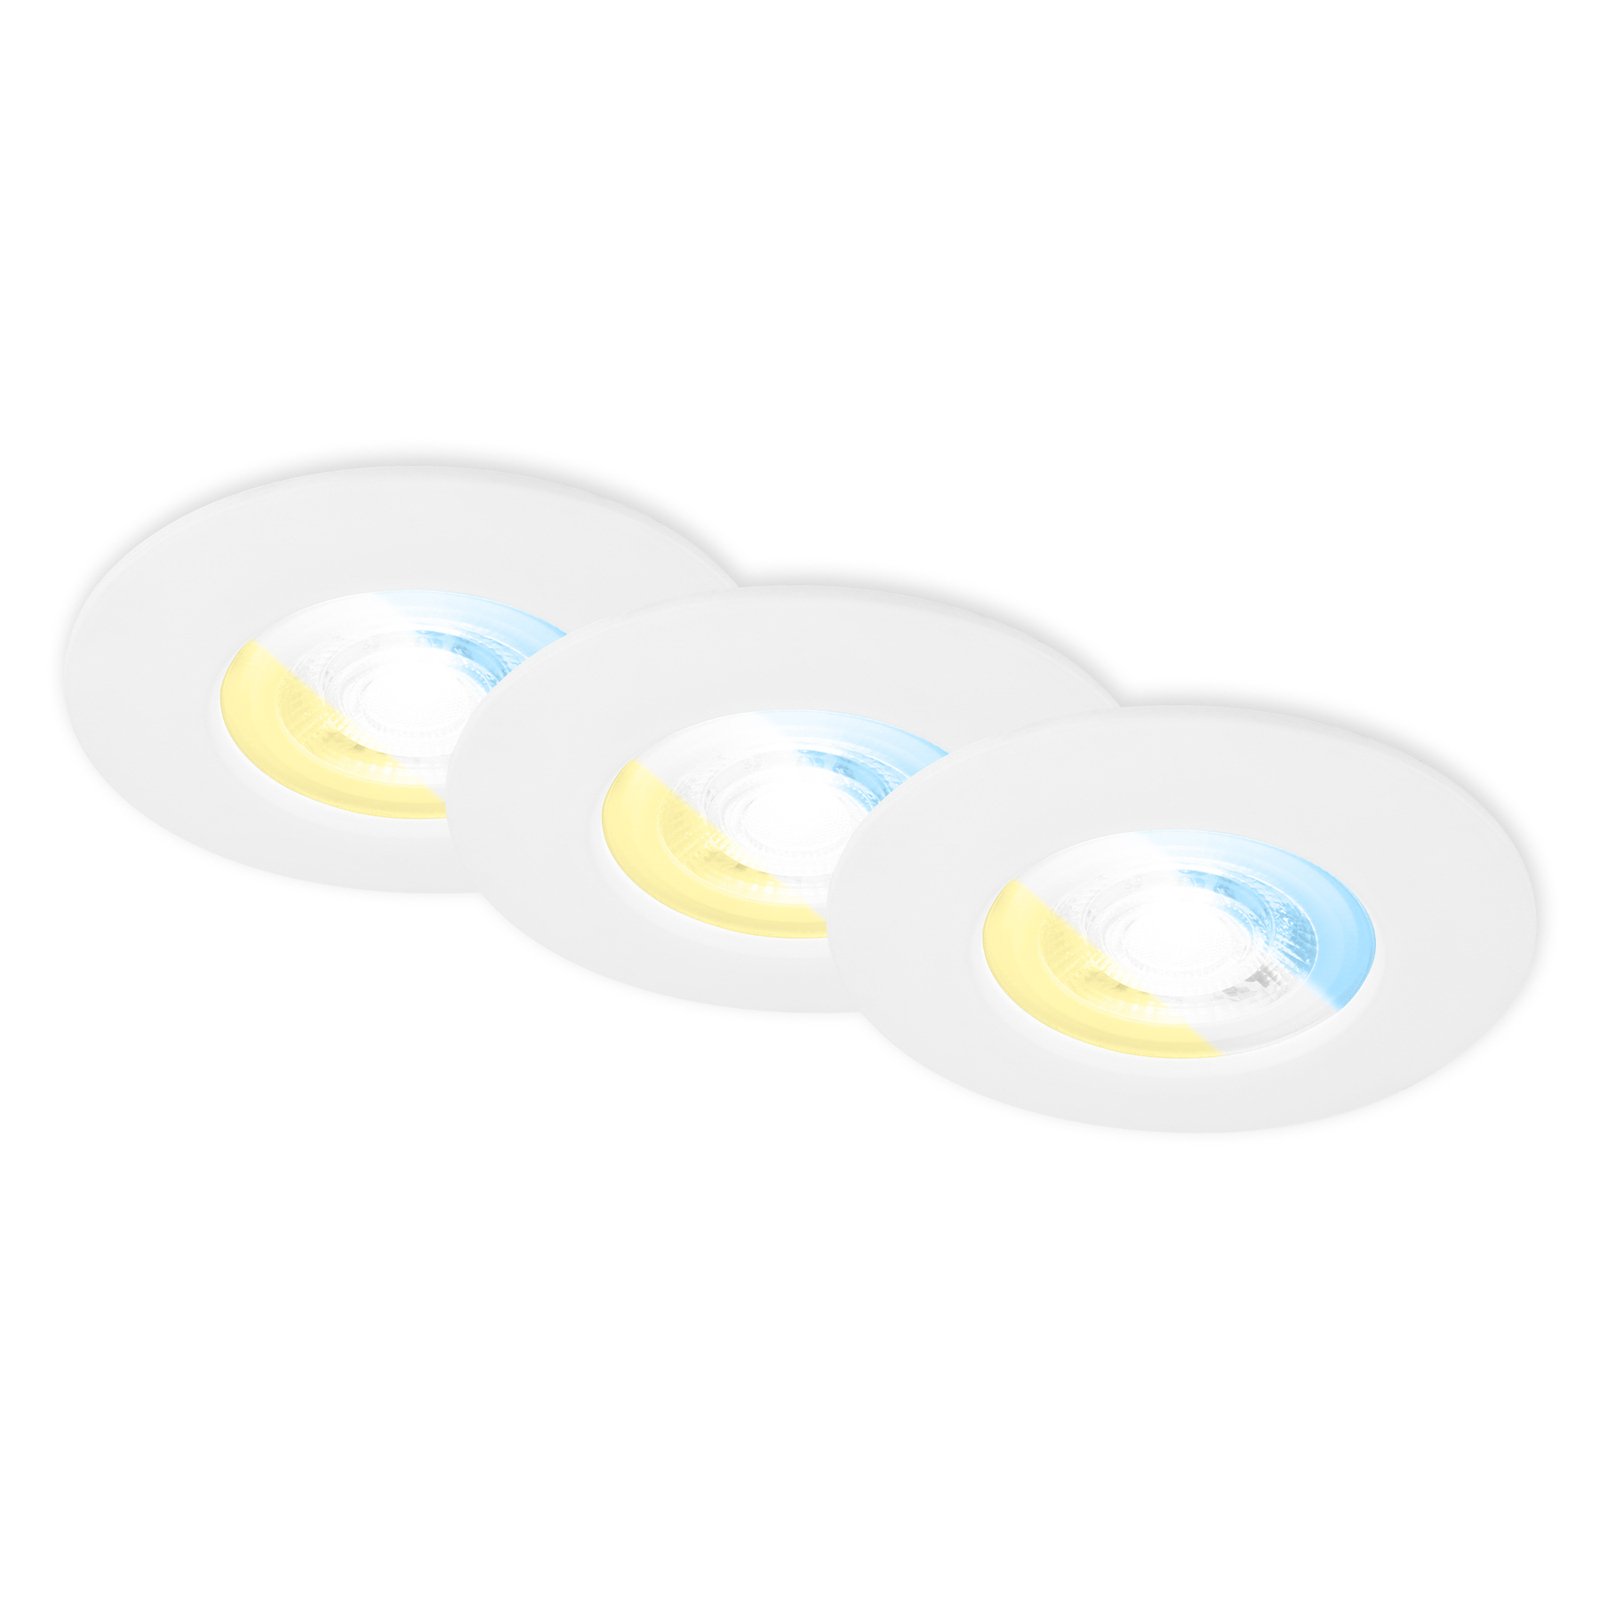 7605 LED recessed spotlight IP44 3-pack CTS white